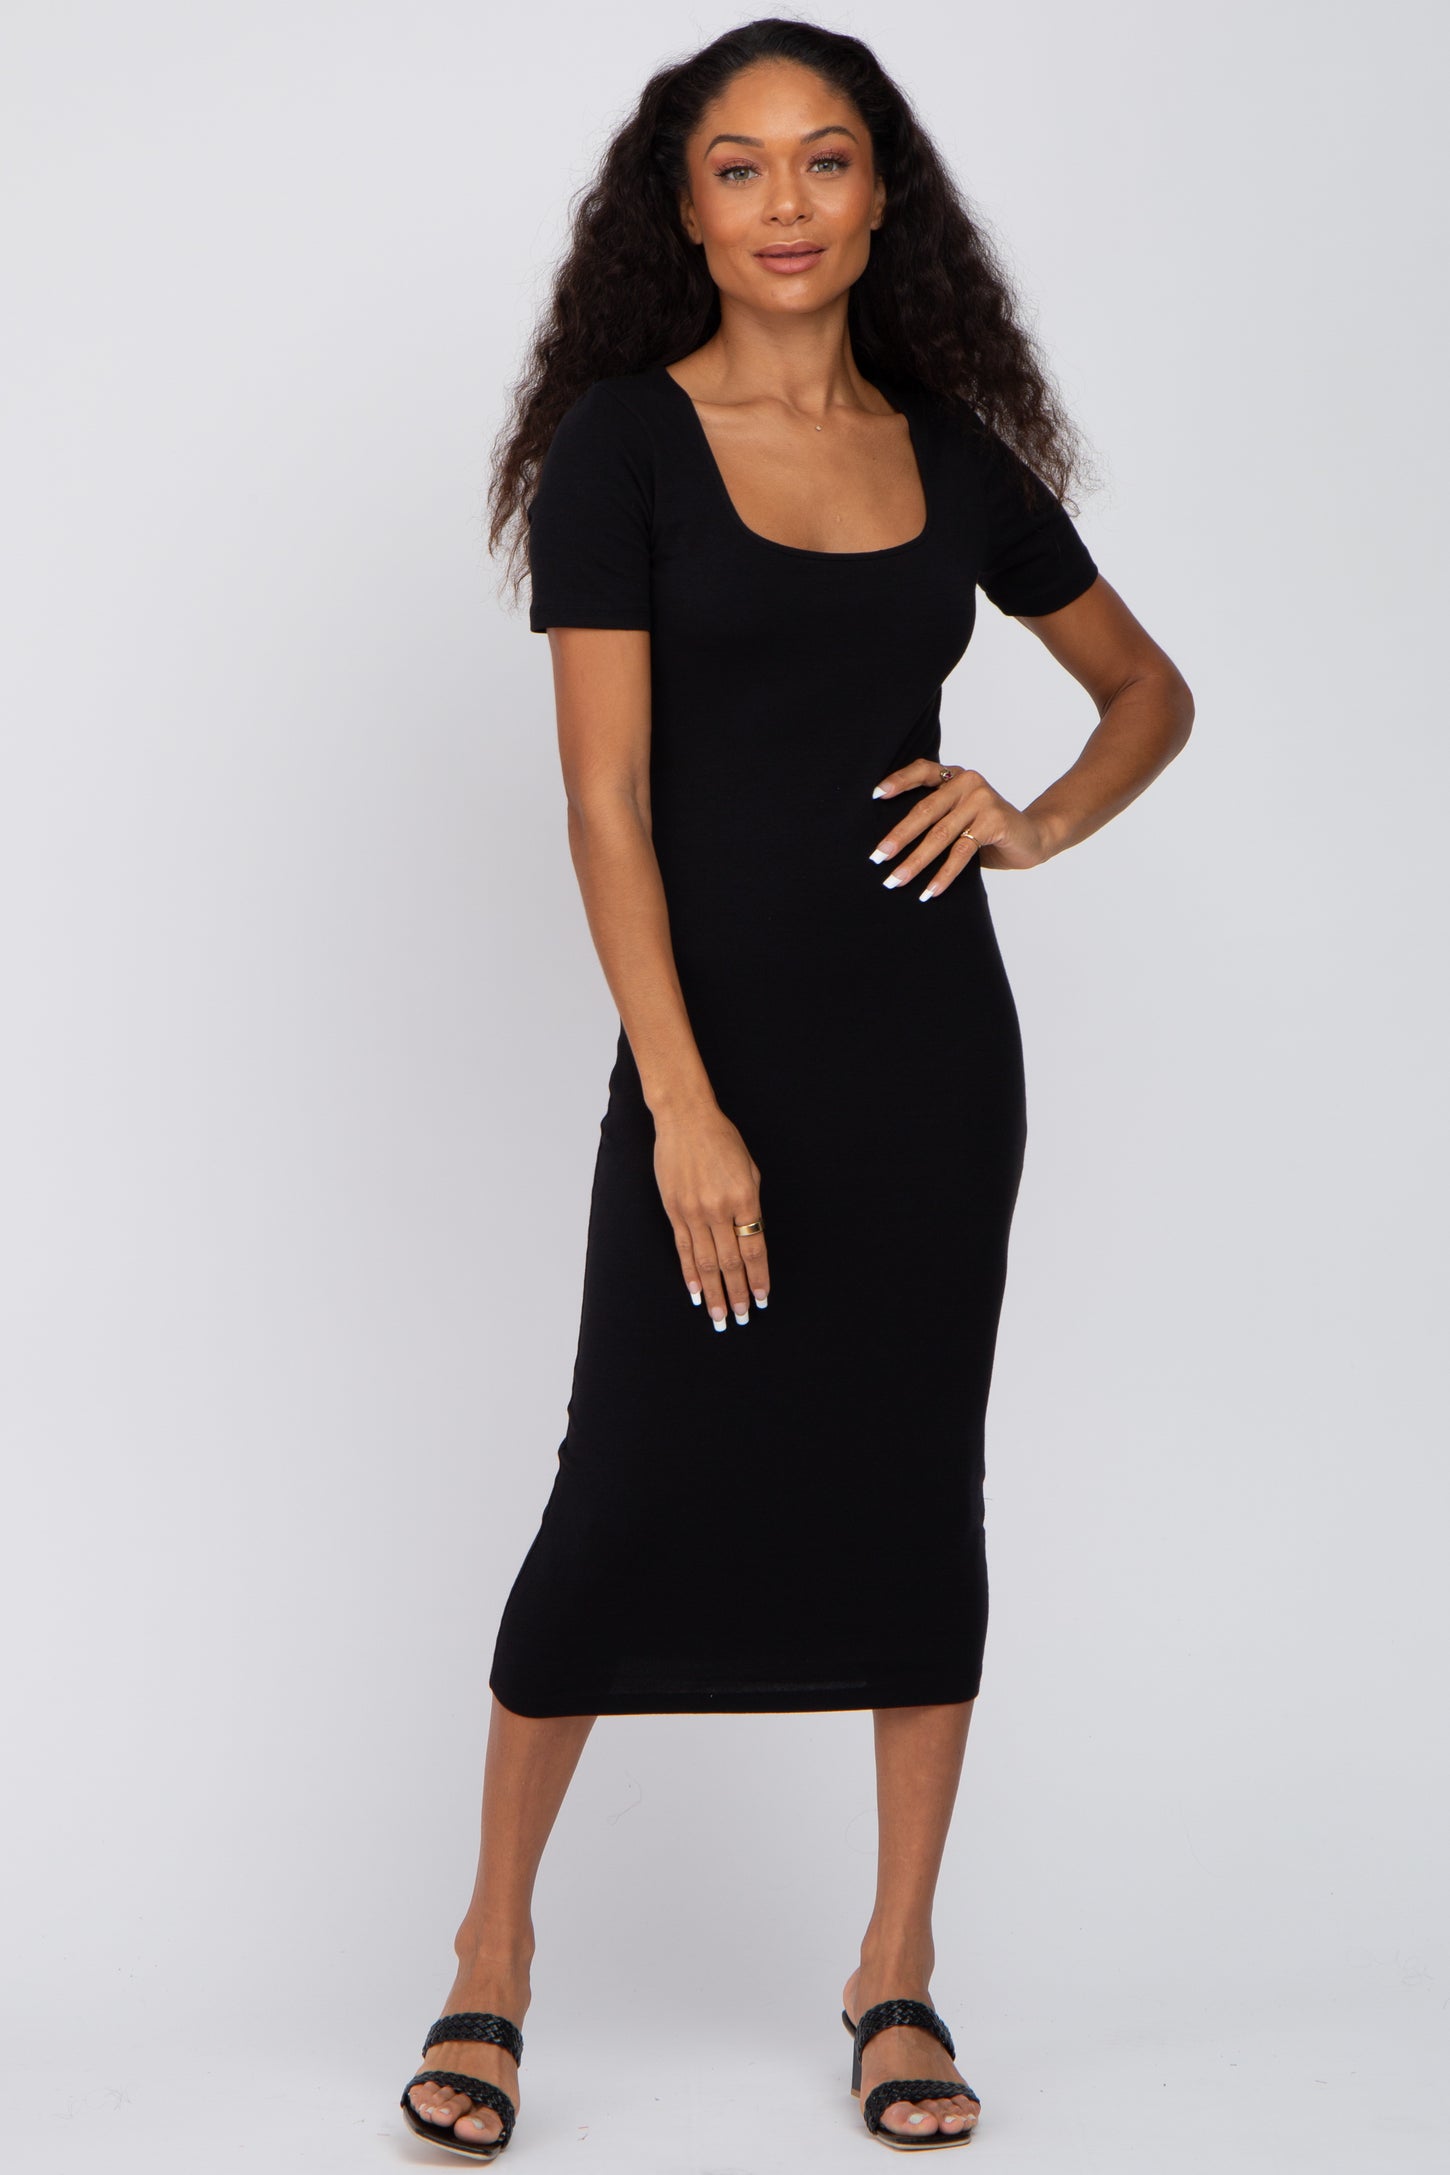 Mango fitted dress with v-neck in black | ASOS